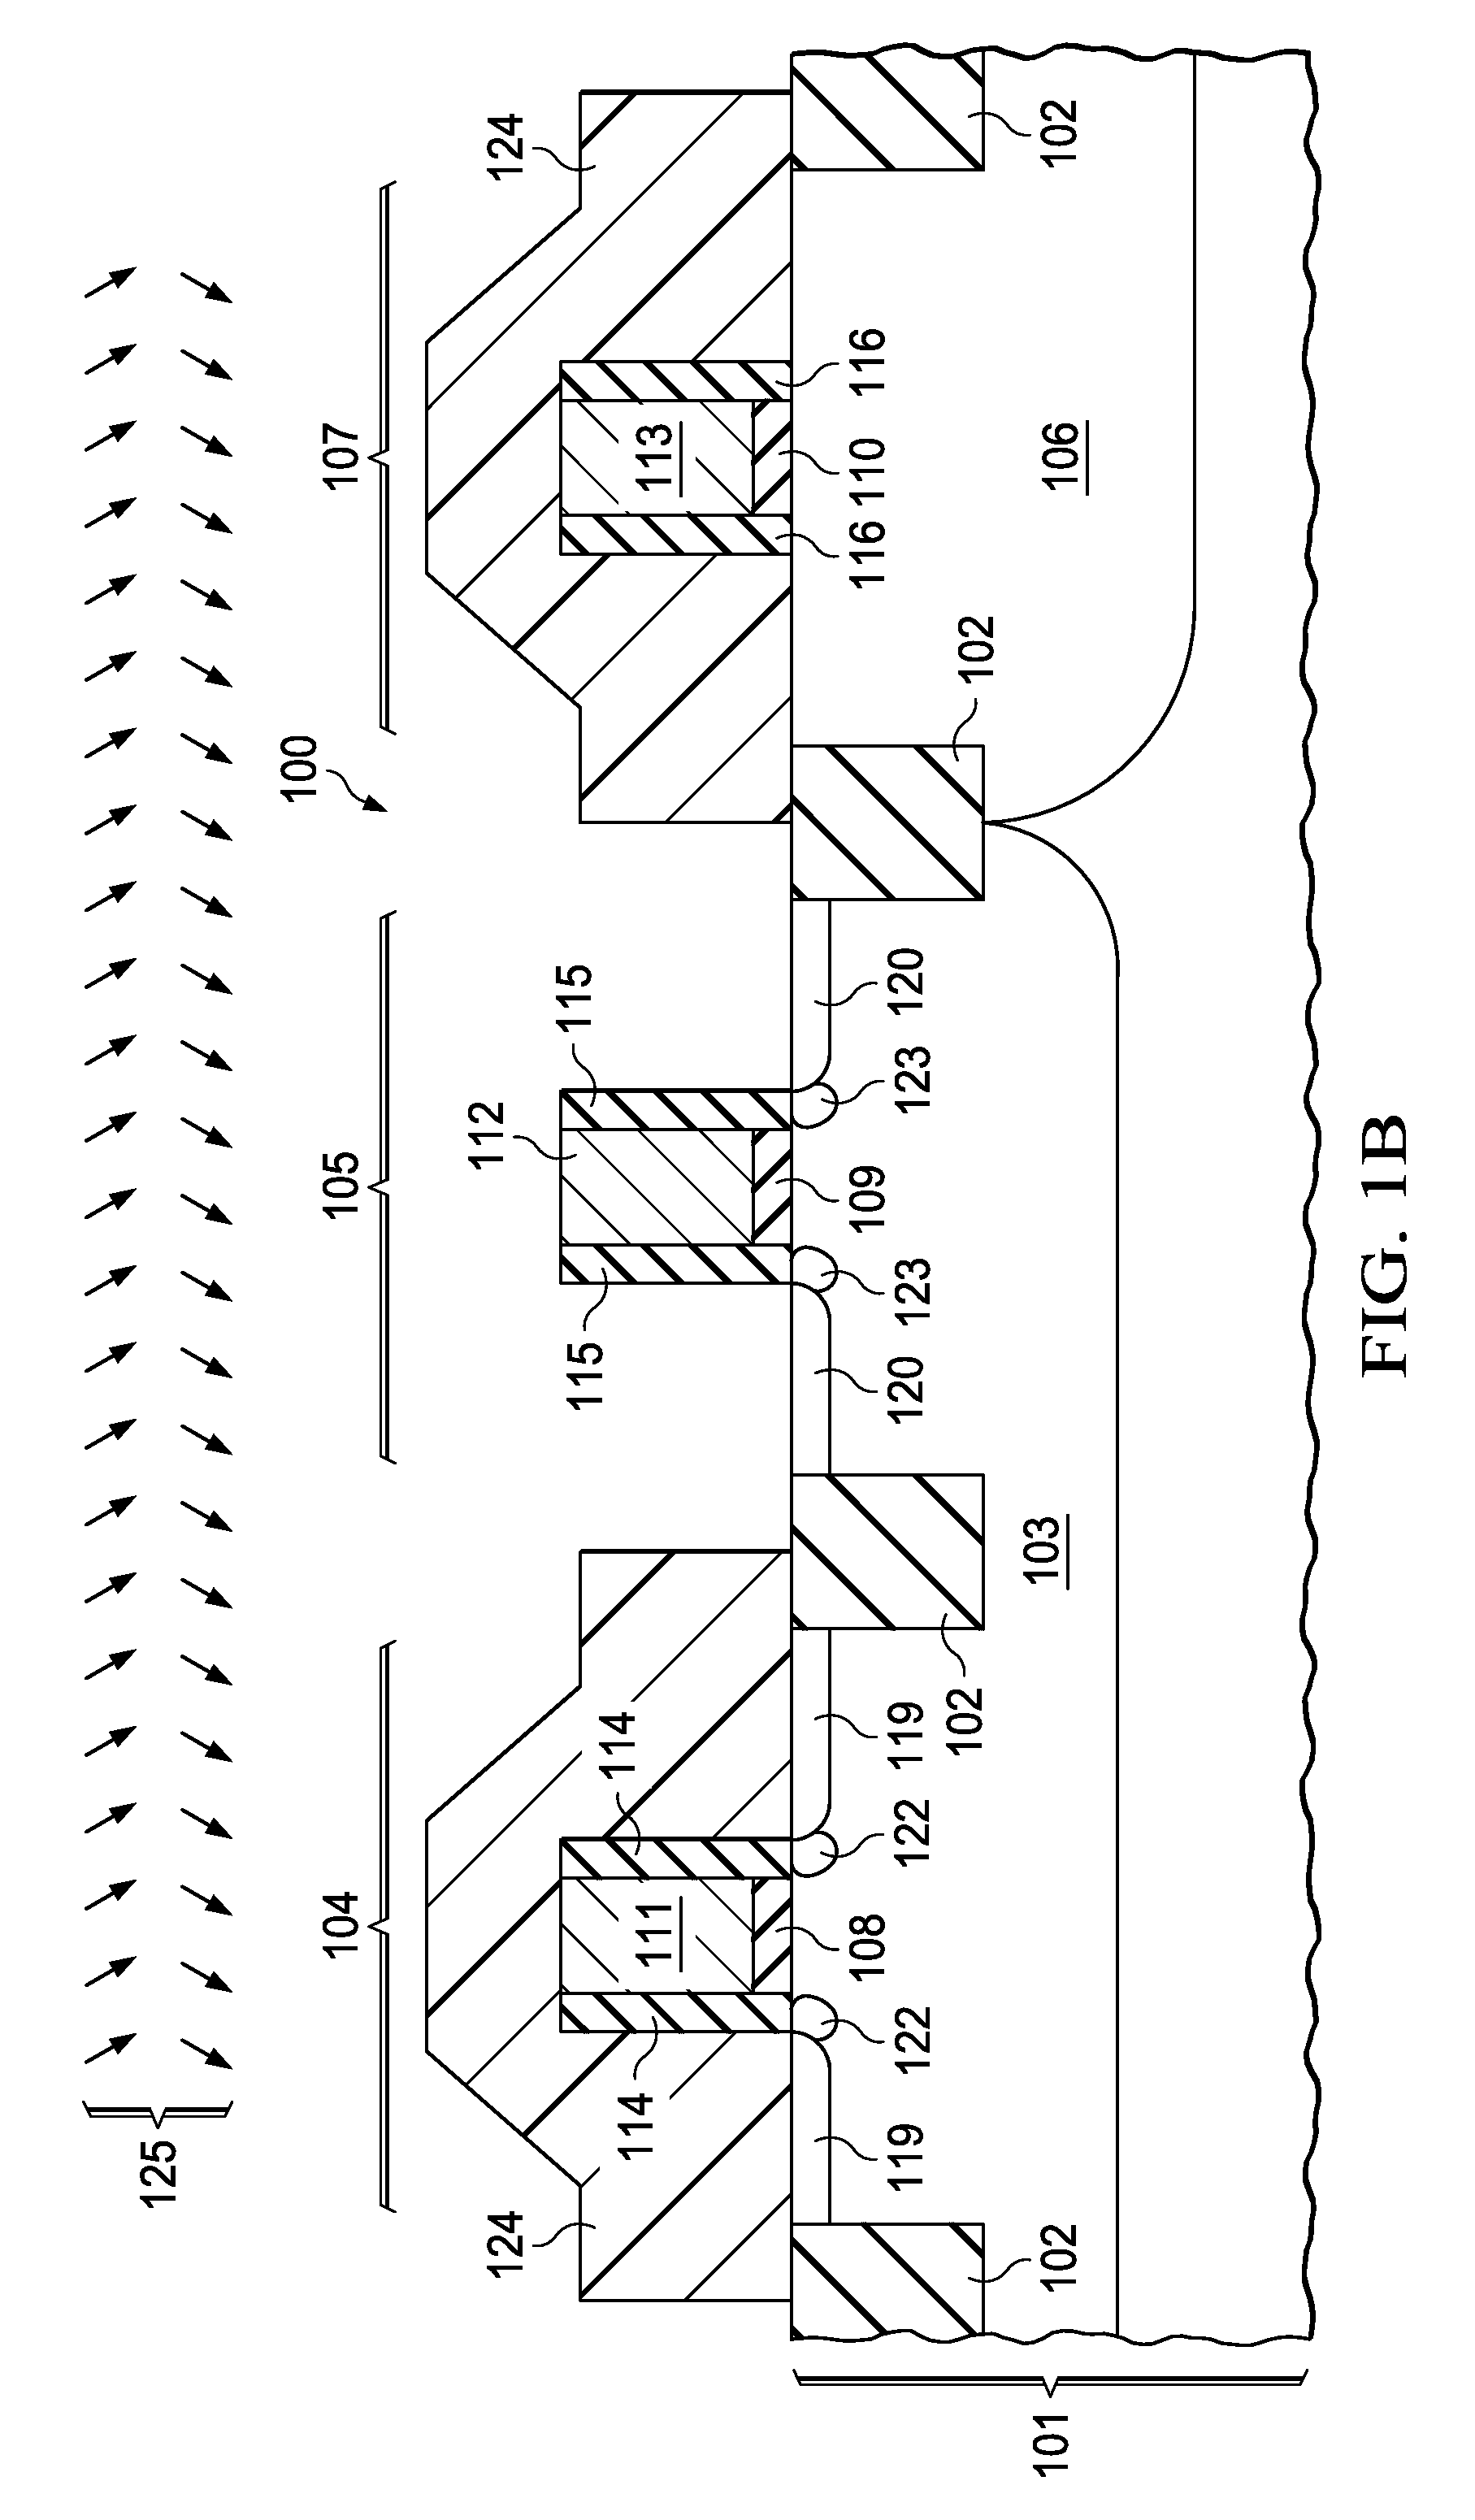 Gated quantum resonant tunneling diode using CMOS transistor with modified pocket and LDD implants